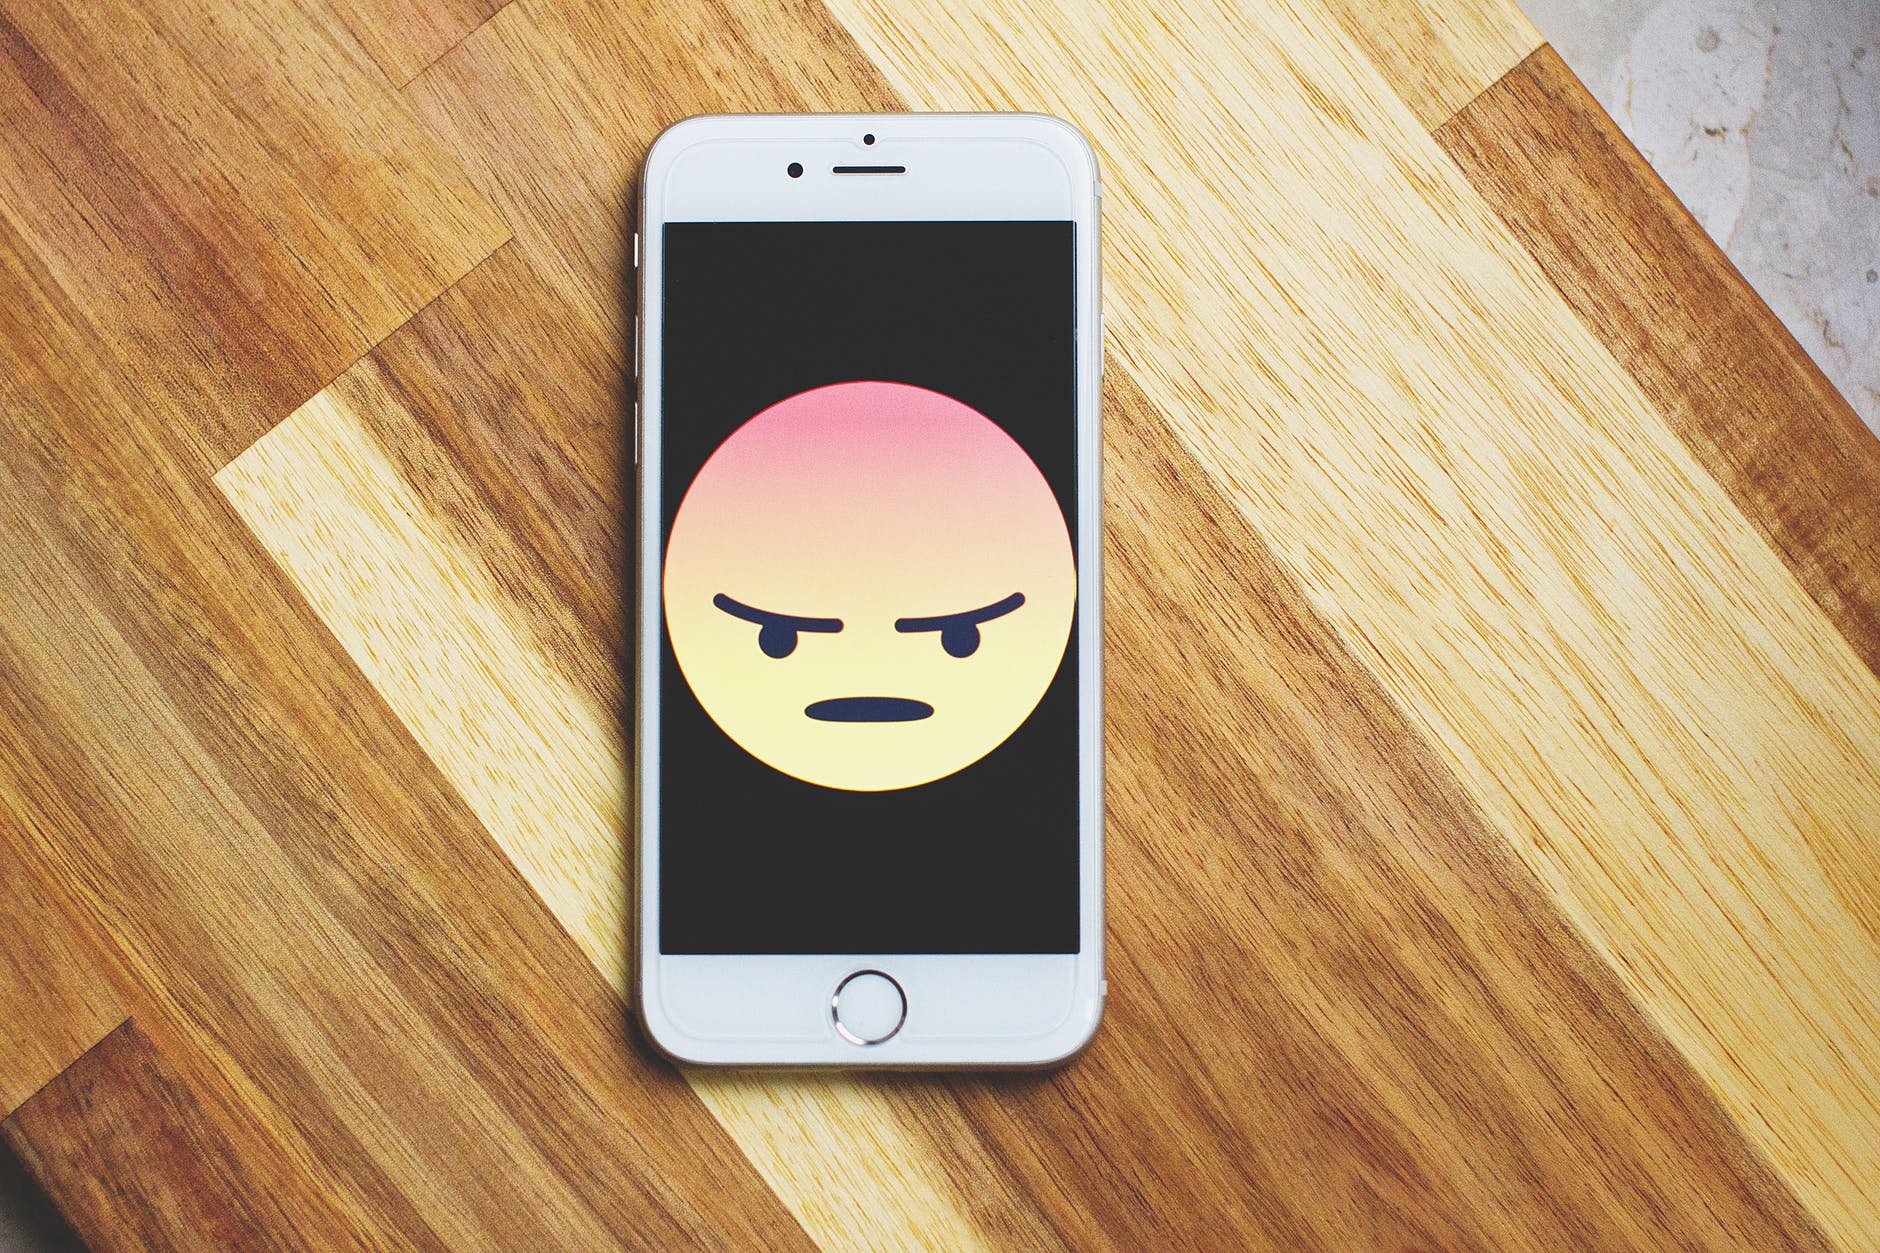 Angry face emoji on iPhone